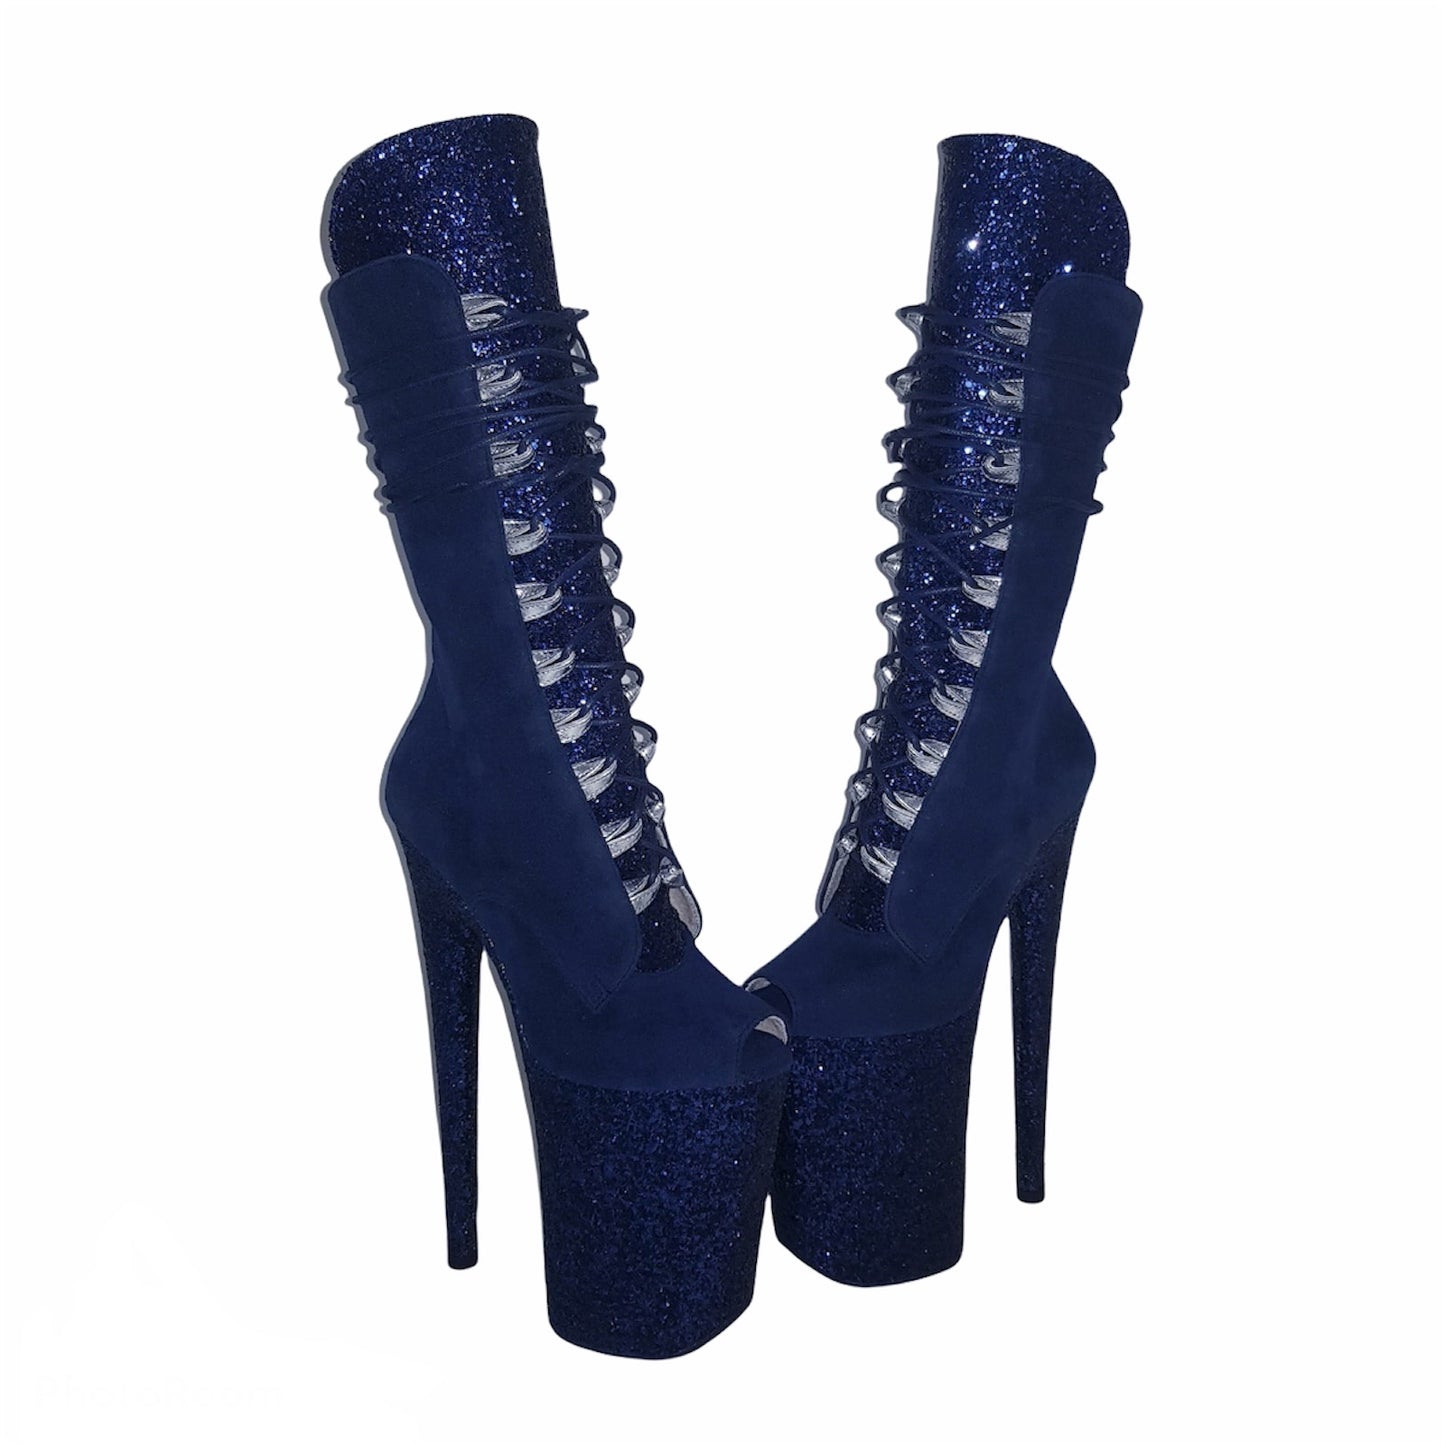 Navy blue vegan suede glitter platform ankle - mid calf boots(more colors are available)